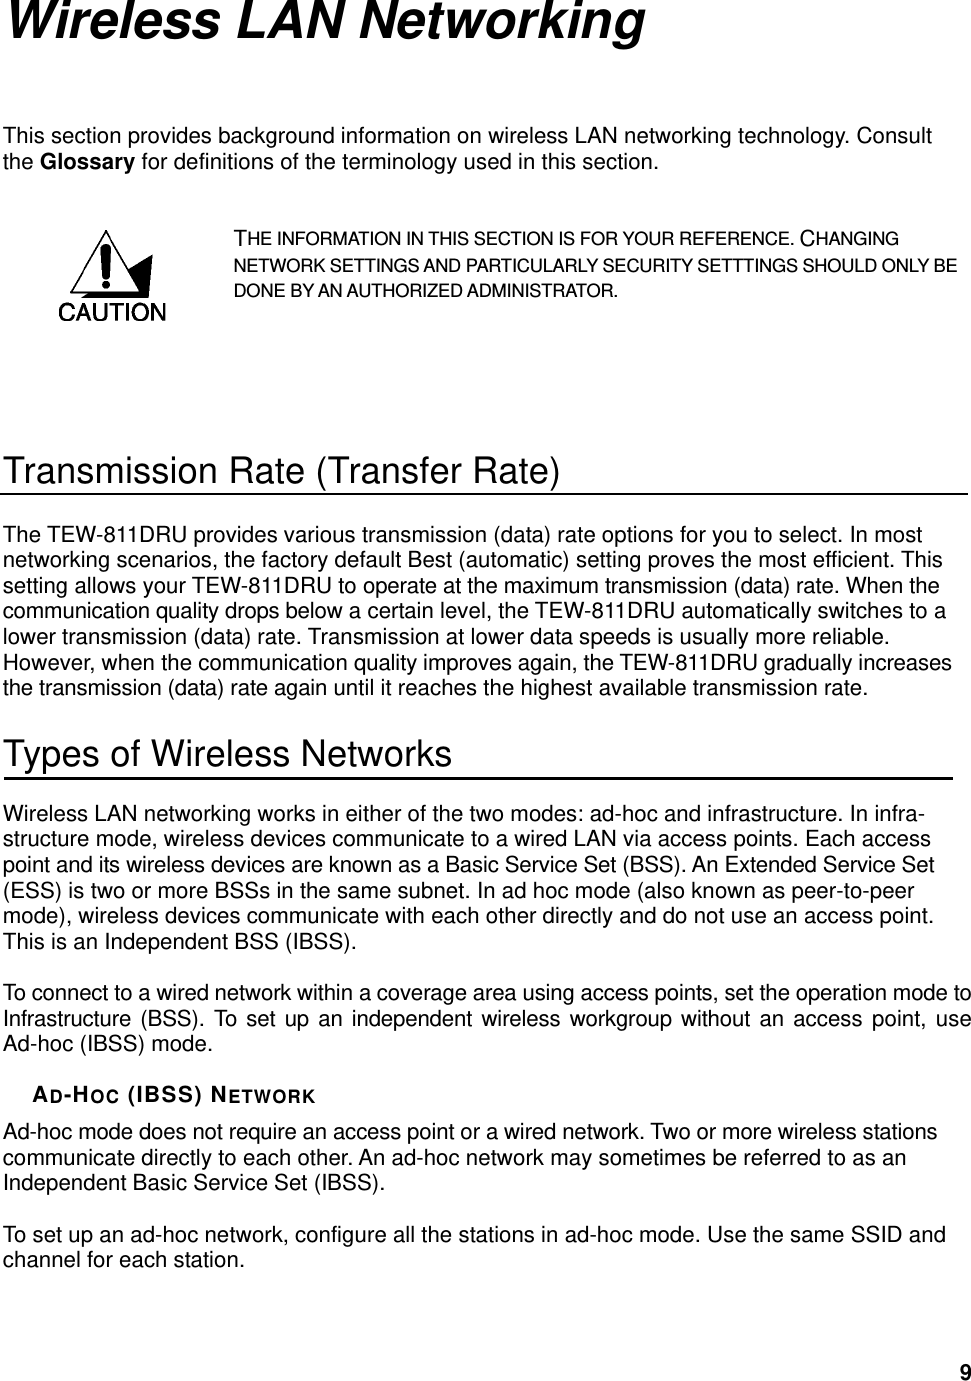  9Wireless LAN Networking This section provides background information on wireless LAN networking technology. Consult the Glossary for definitions of the terminology used in this section. THE INFORMATION IN THIS SECTION IS FOR YOUR REFERENCE. CHANGING NETWORK SETTINGS AND PARTICULARLY SECURITY SETTTINGS SHOULD ONLY BE DONE BY AN AUTHORIZED ADMINISTRATOR.   Transmission Rate (Transfer Rate) The TEW-811DRU provides various transmission (data) rate options for you to select. In most networking scenarios, the factory default Best (automatic) setting proves the most efficient. This setting allows your TEW-811DRU to operate at the maximum transmission (data) rate. When the communication quality drops below a certain level, the TEW-811DRU automatically switches to a lower transmission (data) rate. Transmission at lower data speeds is usually more reliable. However, when the communication quality improves again, the TEW-811DRU gradually increases the transmission (data) rate again until it reaches the highest available transmission rate. Types of Wireless Networks Wireless LAN networking works in either of the two modes: ad-hoc and infrastructure. In infra-structure mode, wireless devices communicate to a wired LAN via access points. Each access point and its wireless devices are known as a Basic Service Set (BSS). An Extended Service Set (ESS) is two or more BSSs in the same subnet. In ad hoc mode (also known as peer-to-peer mode), wireless devices communicate with each other directly and do not use an access point. This is an Independent BSS (IBSS).  To connect to a wired network within a coverage area using access points, set the operation mode to Infrastructure (BSS). To set up an independent wireless workgroup without an access point, use Ad-hoc (IBSS) mode.  AD-HOC (IBSS) NETWORK Ad-hoc mode does not require an access point or a wired network. Two or more wireless stations communicate directly to each other. An ad-hoc network may sometimes be referred to as an Independent Basic Service Set (IBSS).  To set up an ad-hoc network, configure all the stations in ad-hoc mode. Use the same SSID and channel for each station.  